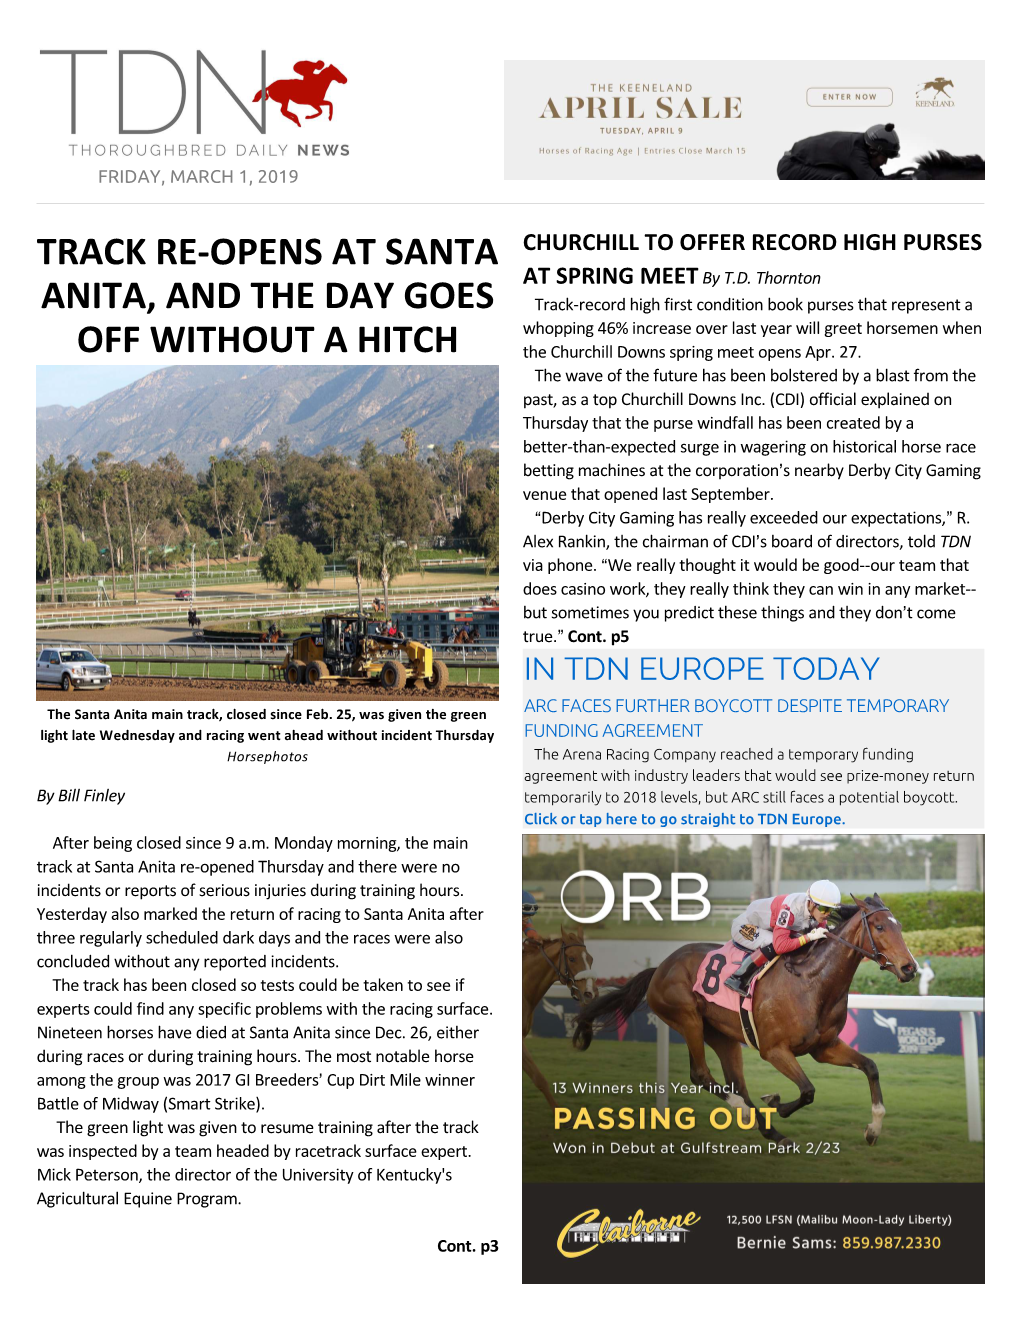 Track Re-Opens at Santa Anita, and the Day Goes Off